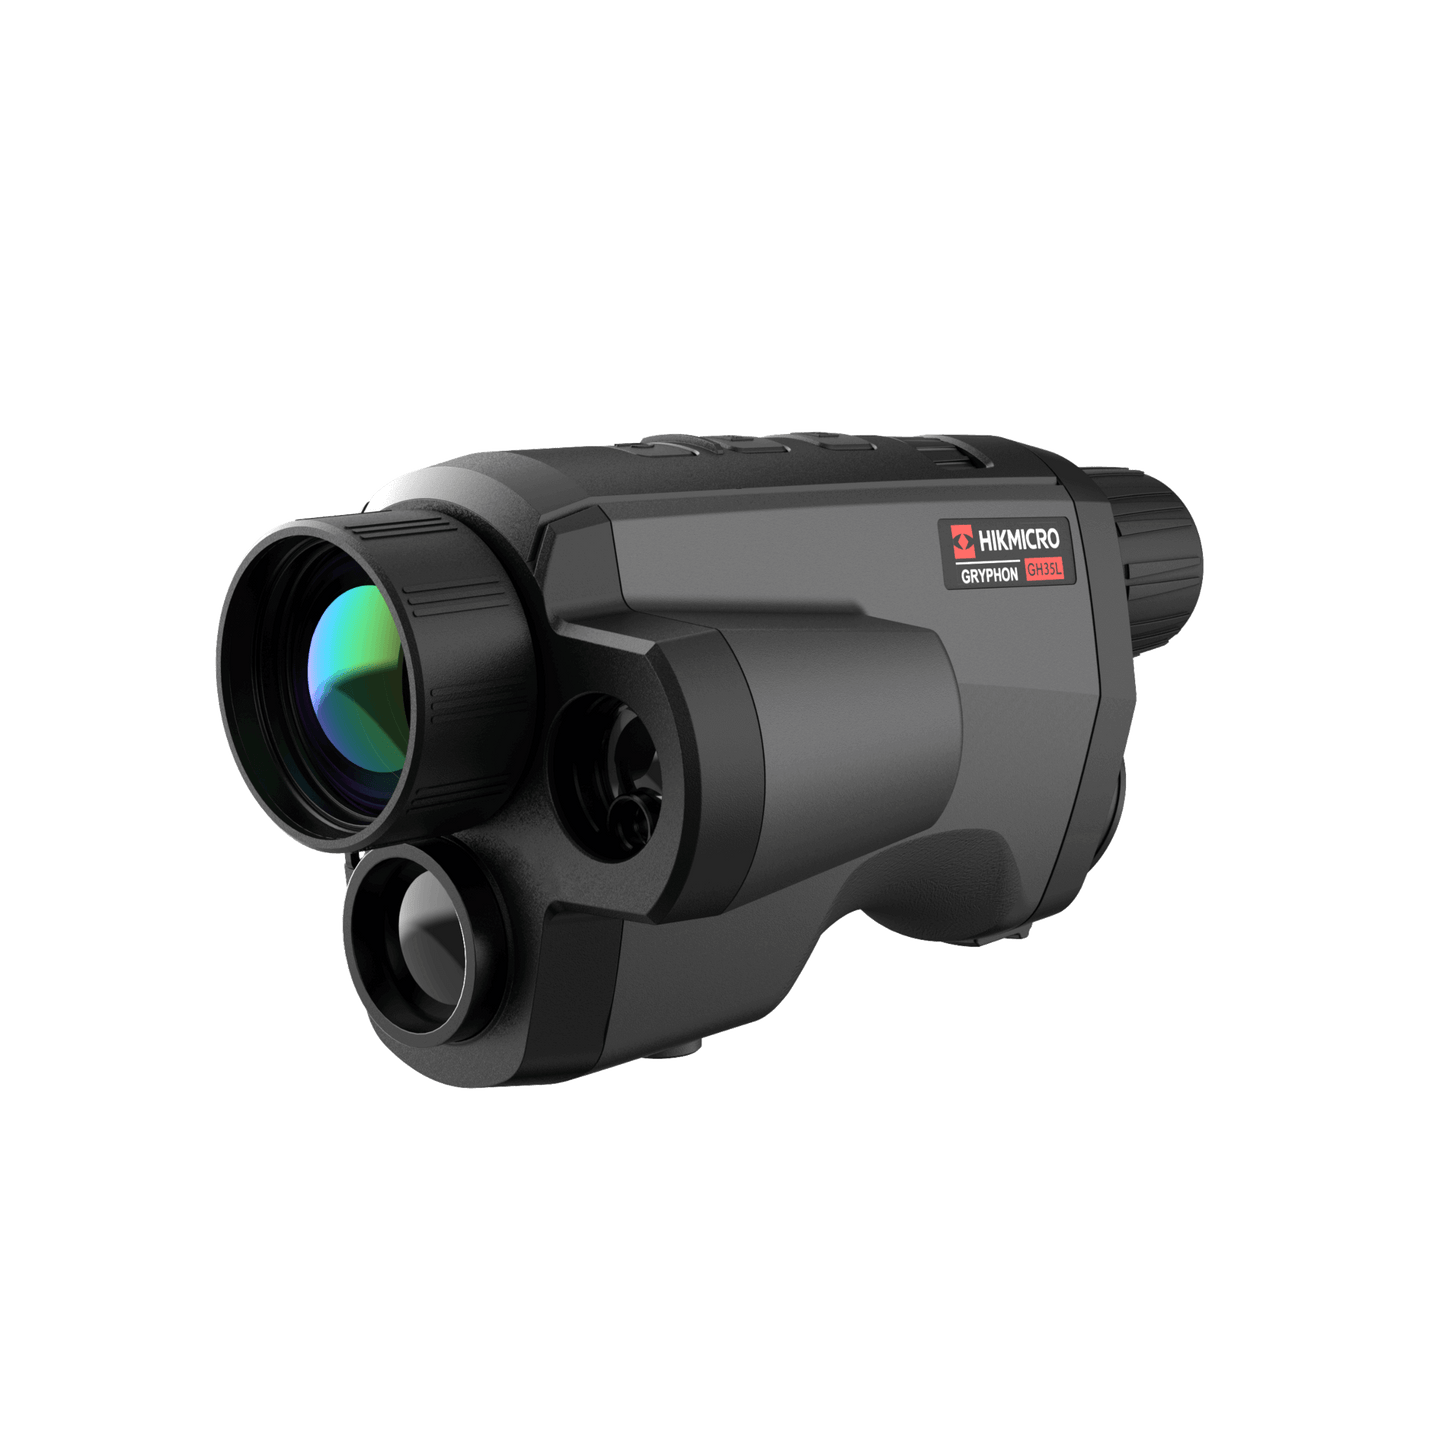 Cape Thermal imaging monocular for sale - HikMicro Gryphon GH35L Handheld thermal monocular front right view